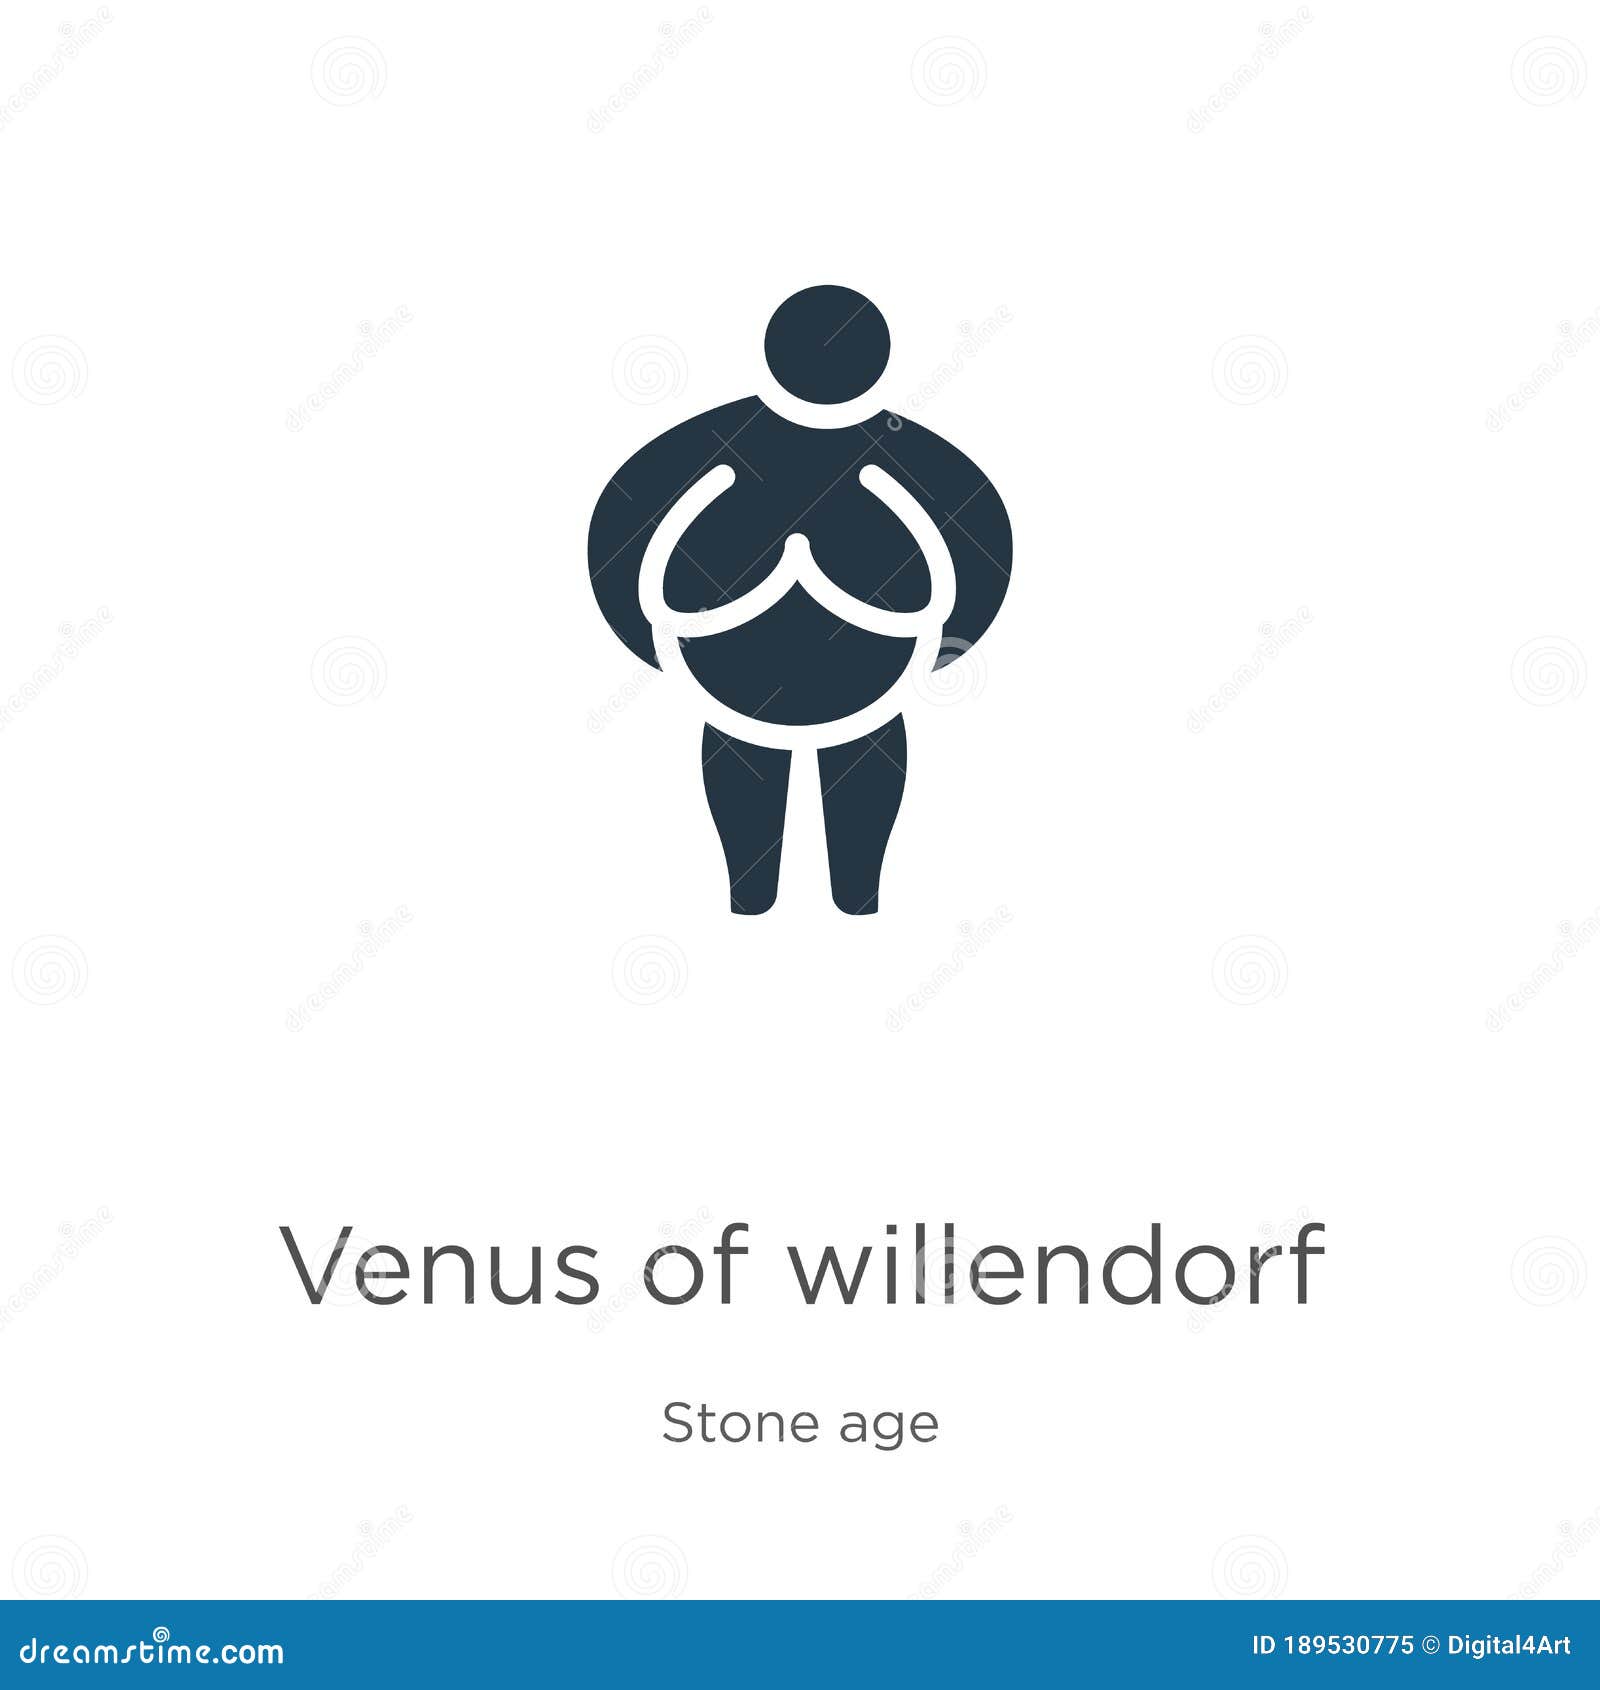 venus of willendorf icon . trendy flat venus of willendorf icon from stone age collection  on white background.